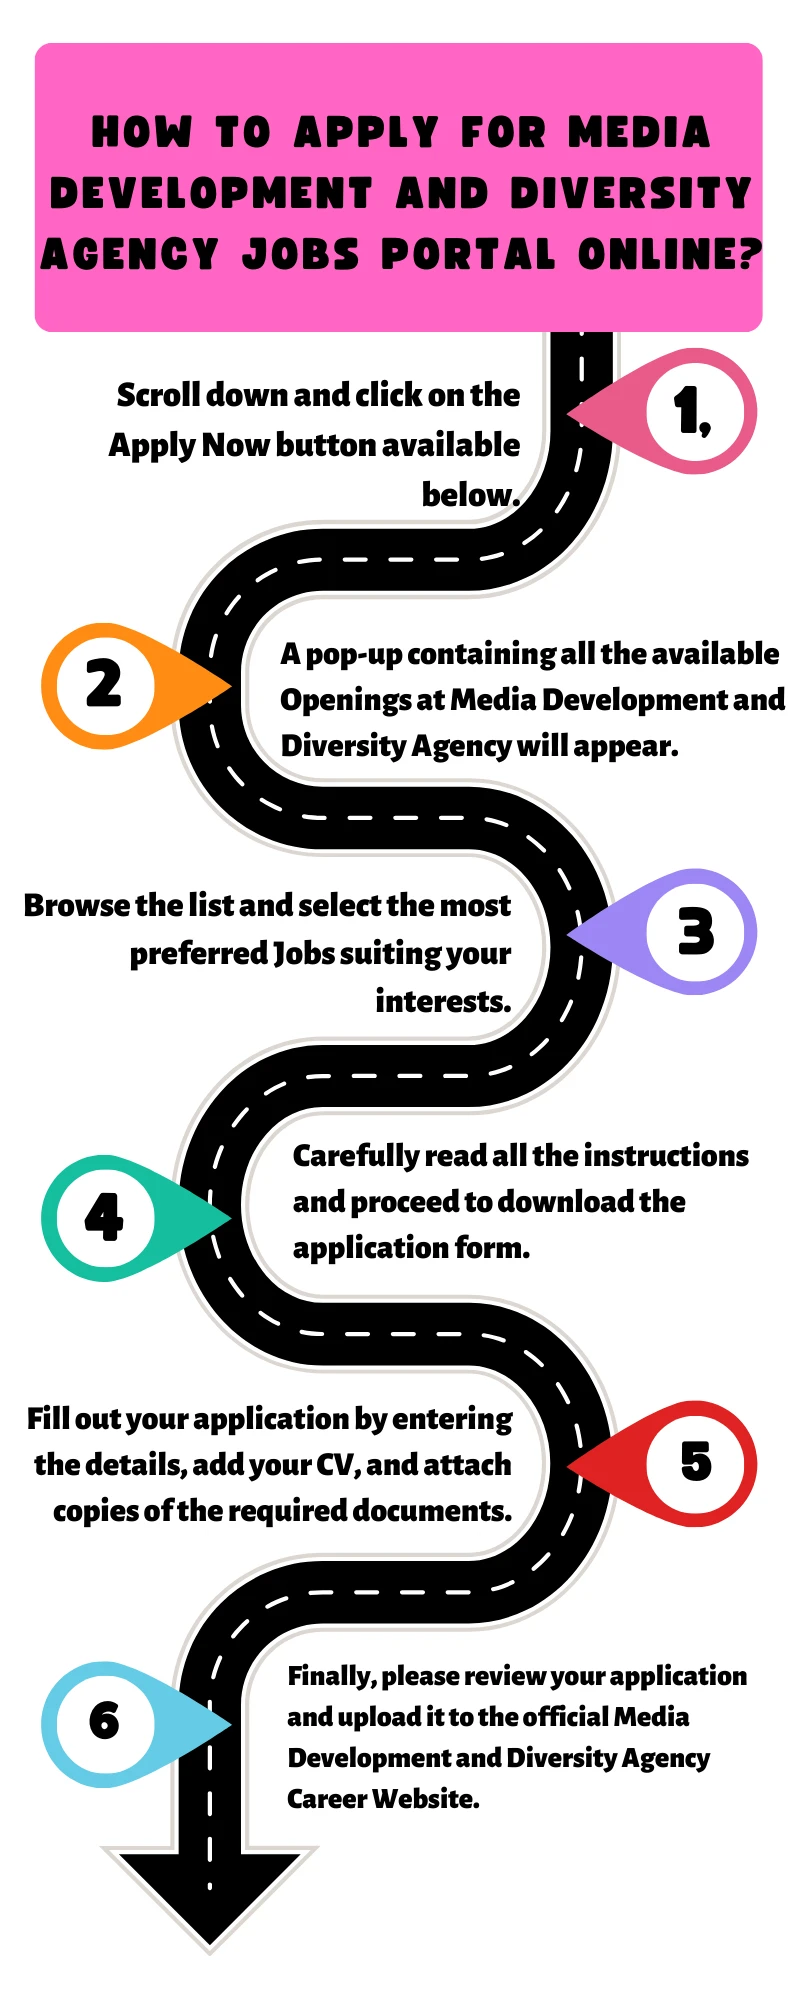 How To Apply for Media Development and Diversity Agency Jobs Portal Online?